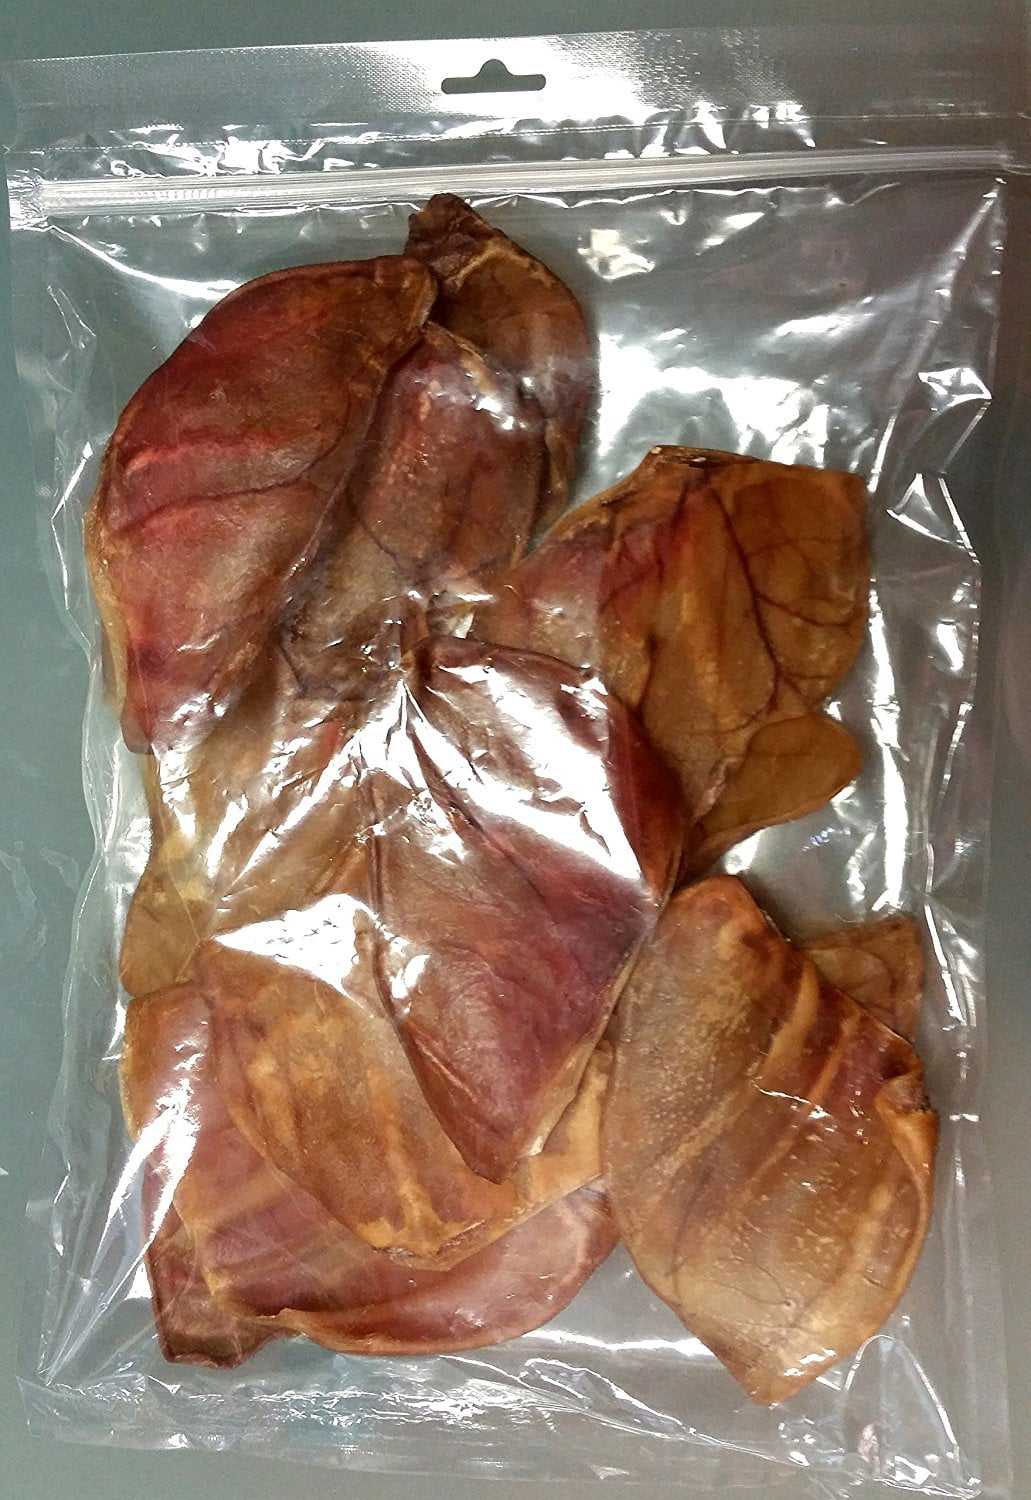 123 Treats Pig Ears for Dogs 100% Natural Pork Ears Full of Protein for Your Pet Quality Dog Chews 12 Pack 